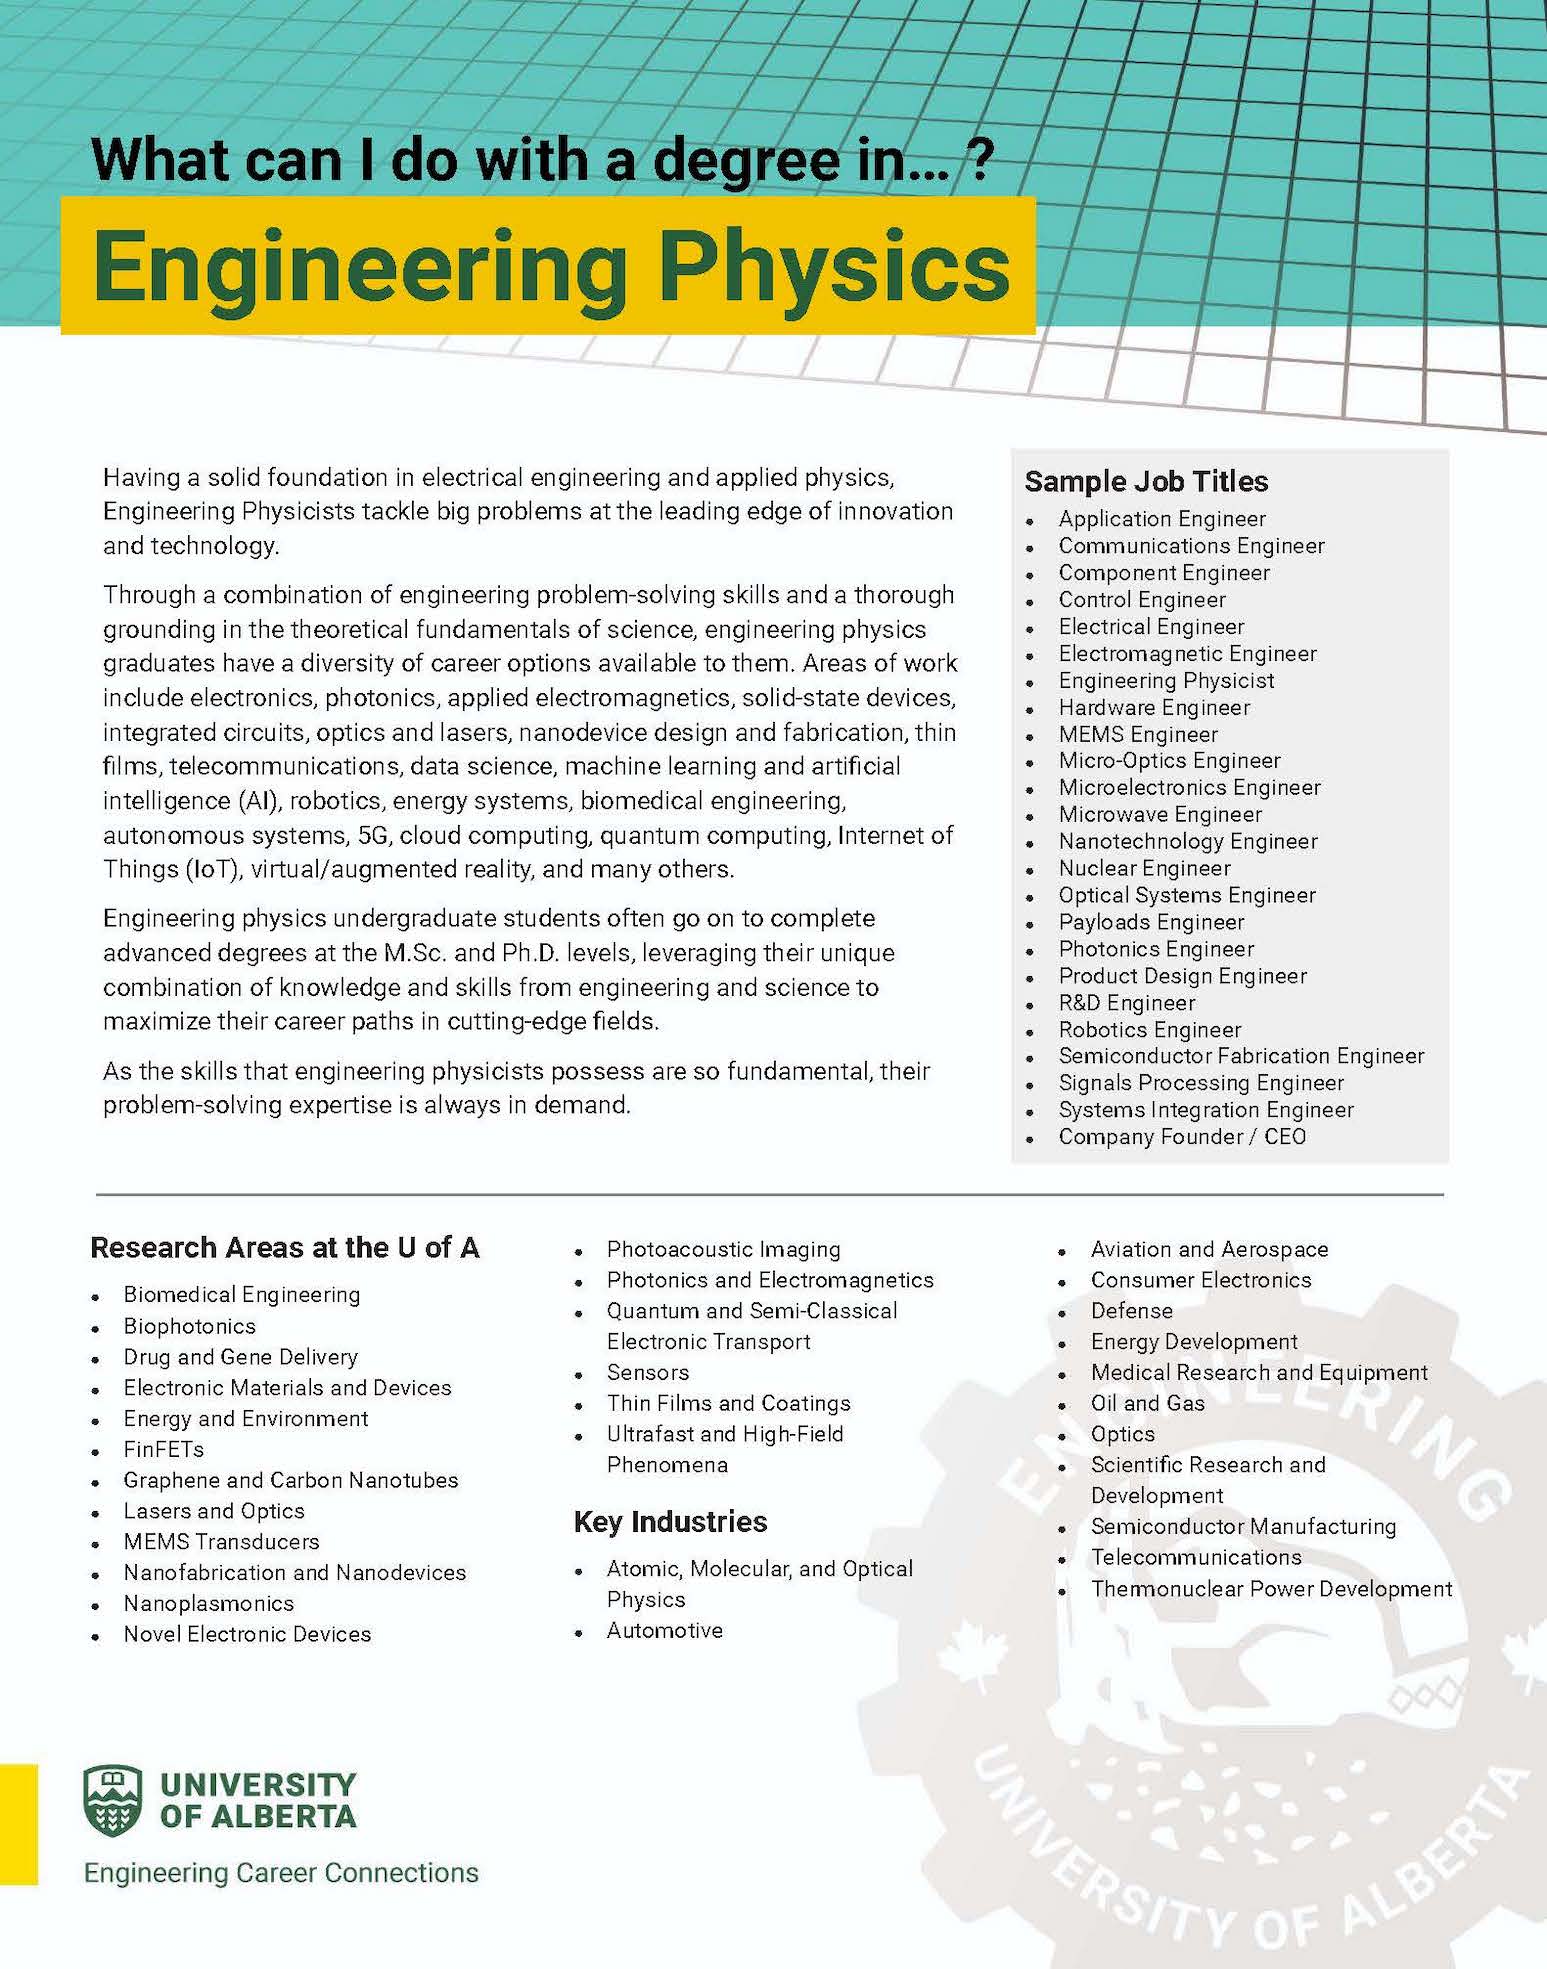 Screenshot of the "What Can I Do With A Degree in Engineering Physics?” Handout. The image links to the handout.